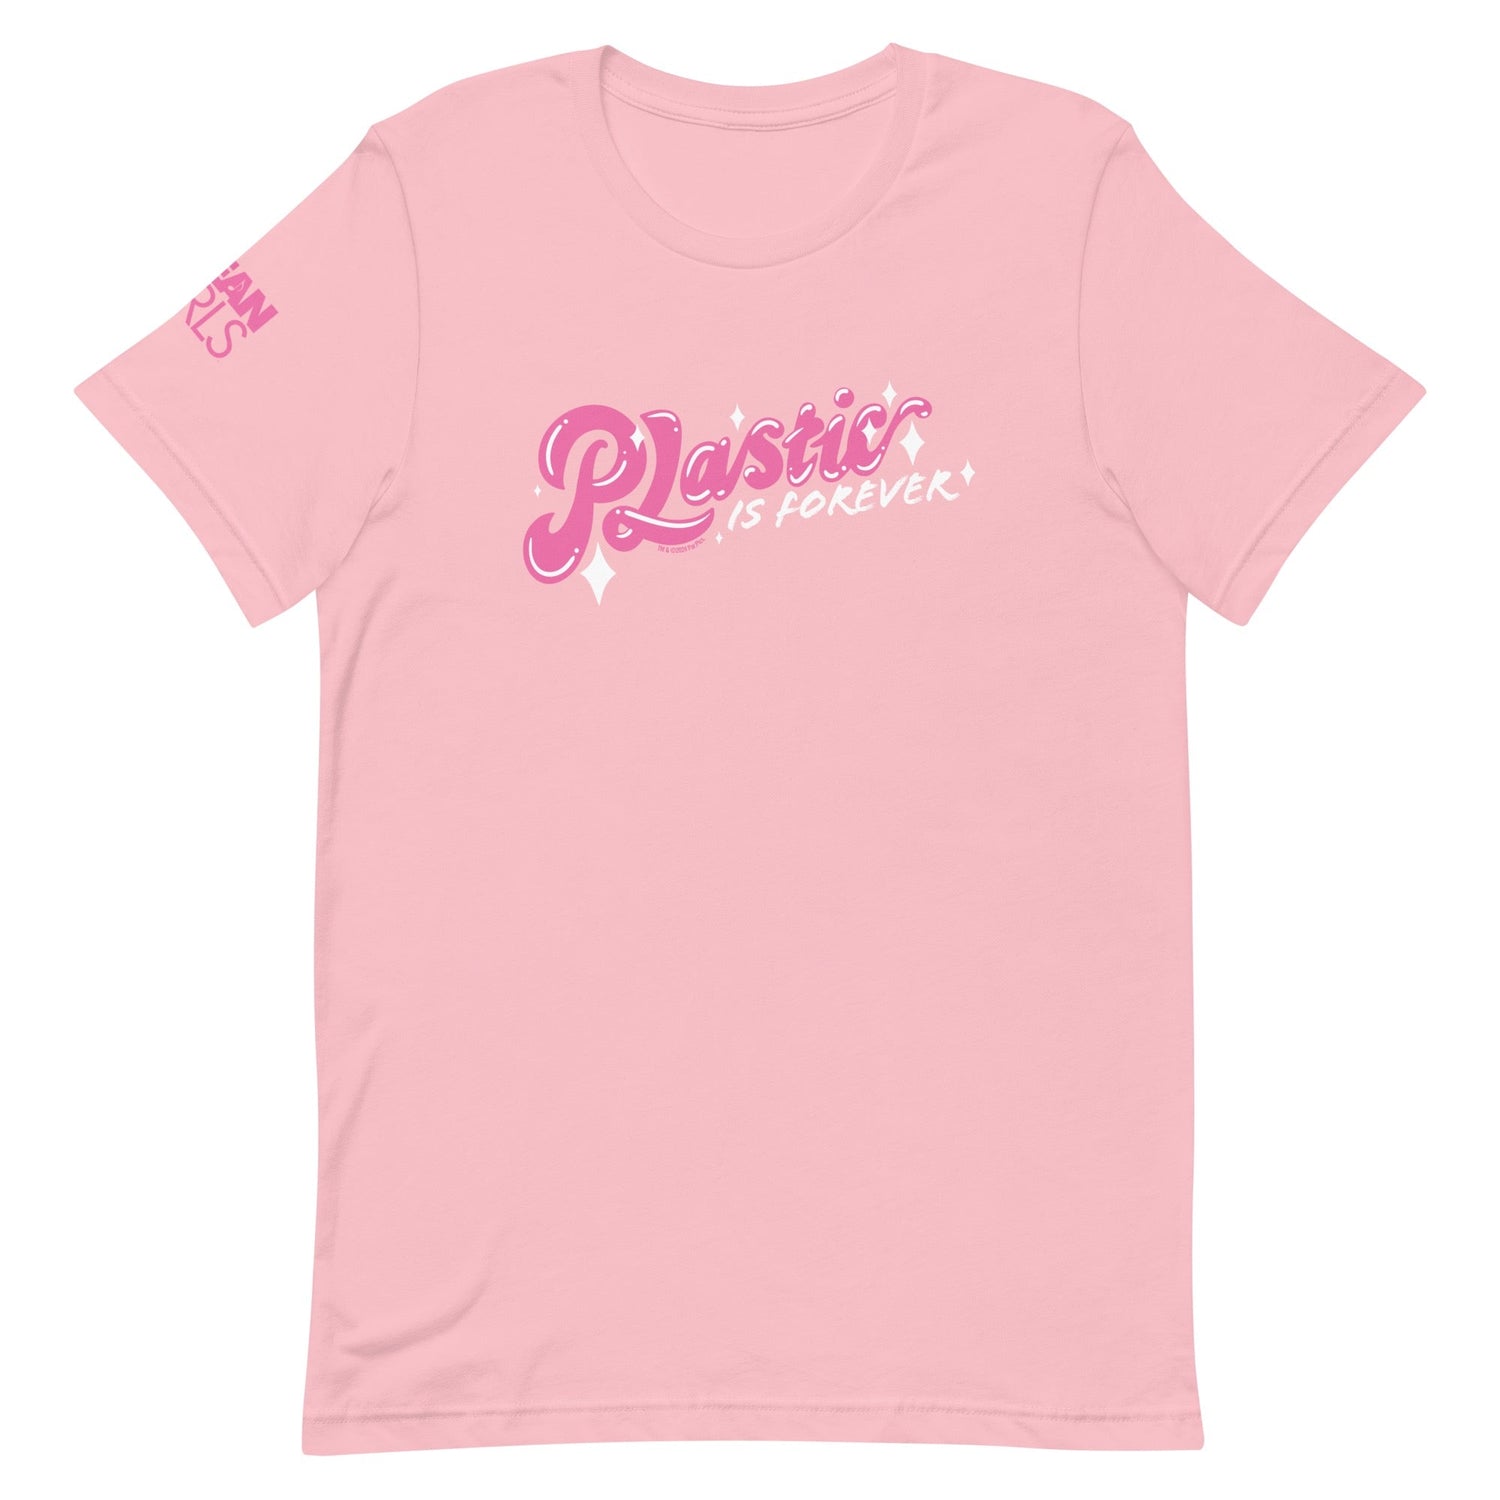 Mean Girls Musical Plastic Is Forever Adult T - Shirt - Paramount Shop